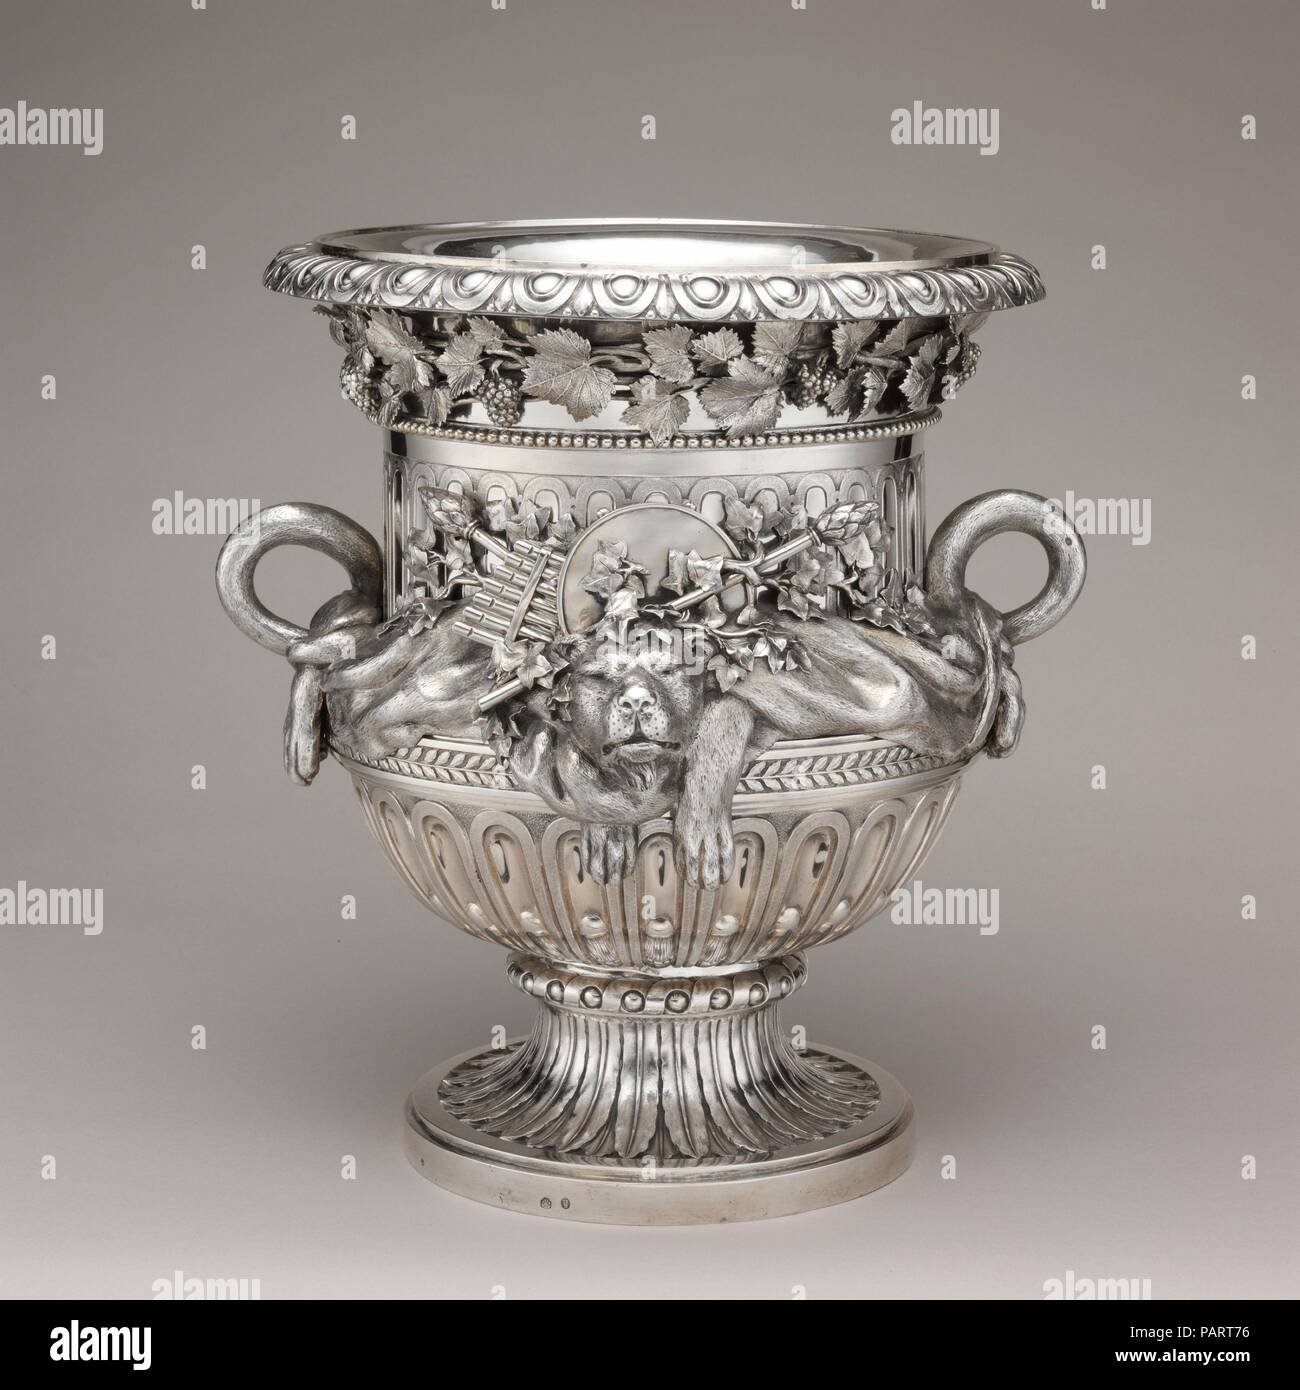 Wine cooler (one of a pair). Culture: Austrian, Vienna. Dimensions: Overall (wt confirmed): 11 15/16 x 9 7/8 in., 6000g (30.3 x 25.1 cm, 6kg). Maker: Ignaz Joseph Würth (Austrian, first mentioned 1769, died 1792). Date: 1781.  The wine coolers formed part of the now dispersed so-called Second Duke of Sachsen-Teschen Service, which originally included all kinds of silver tableware as befit the splendor of royal dining. The overall style is indebted to French Neoclassical designs and encapsulates the strong appreciation of contemporary French art and culture by the patrons, Duke Albert Casimir o Stock Photo